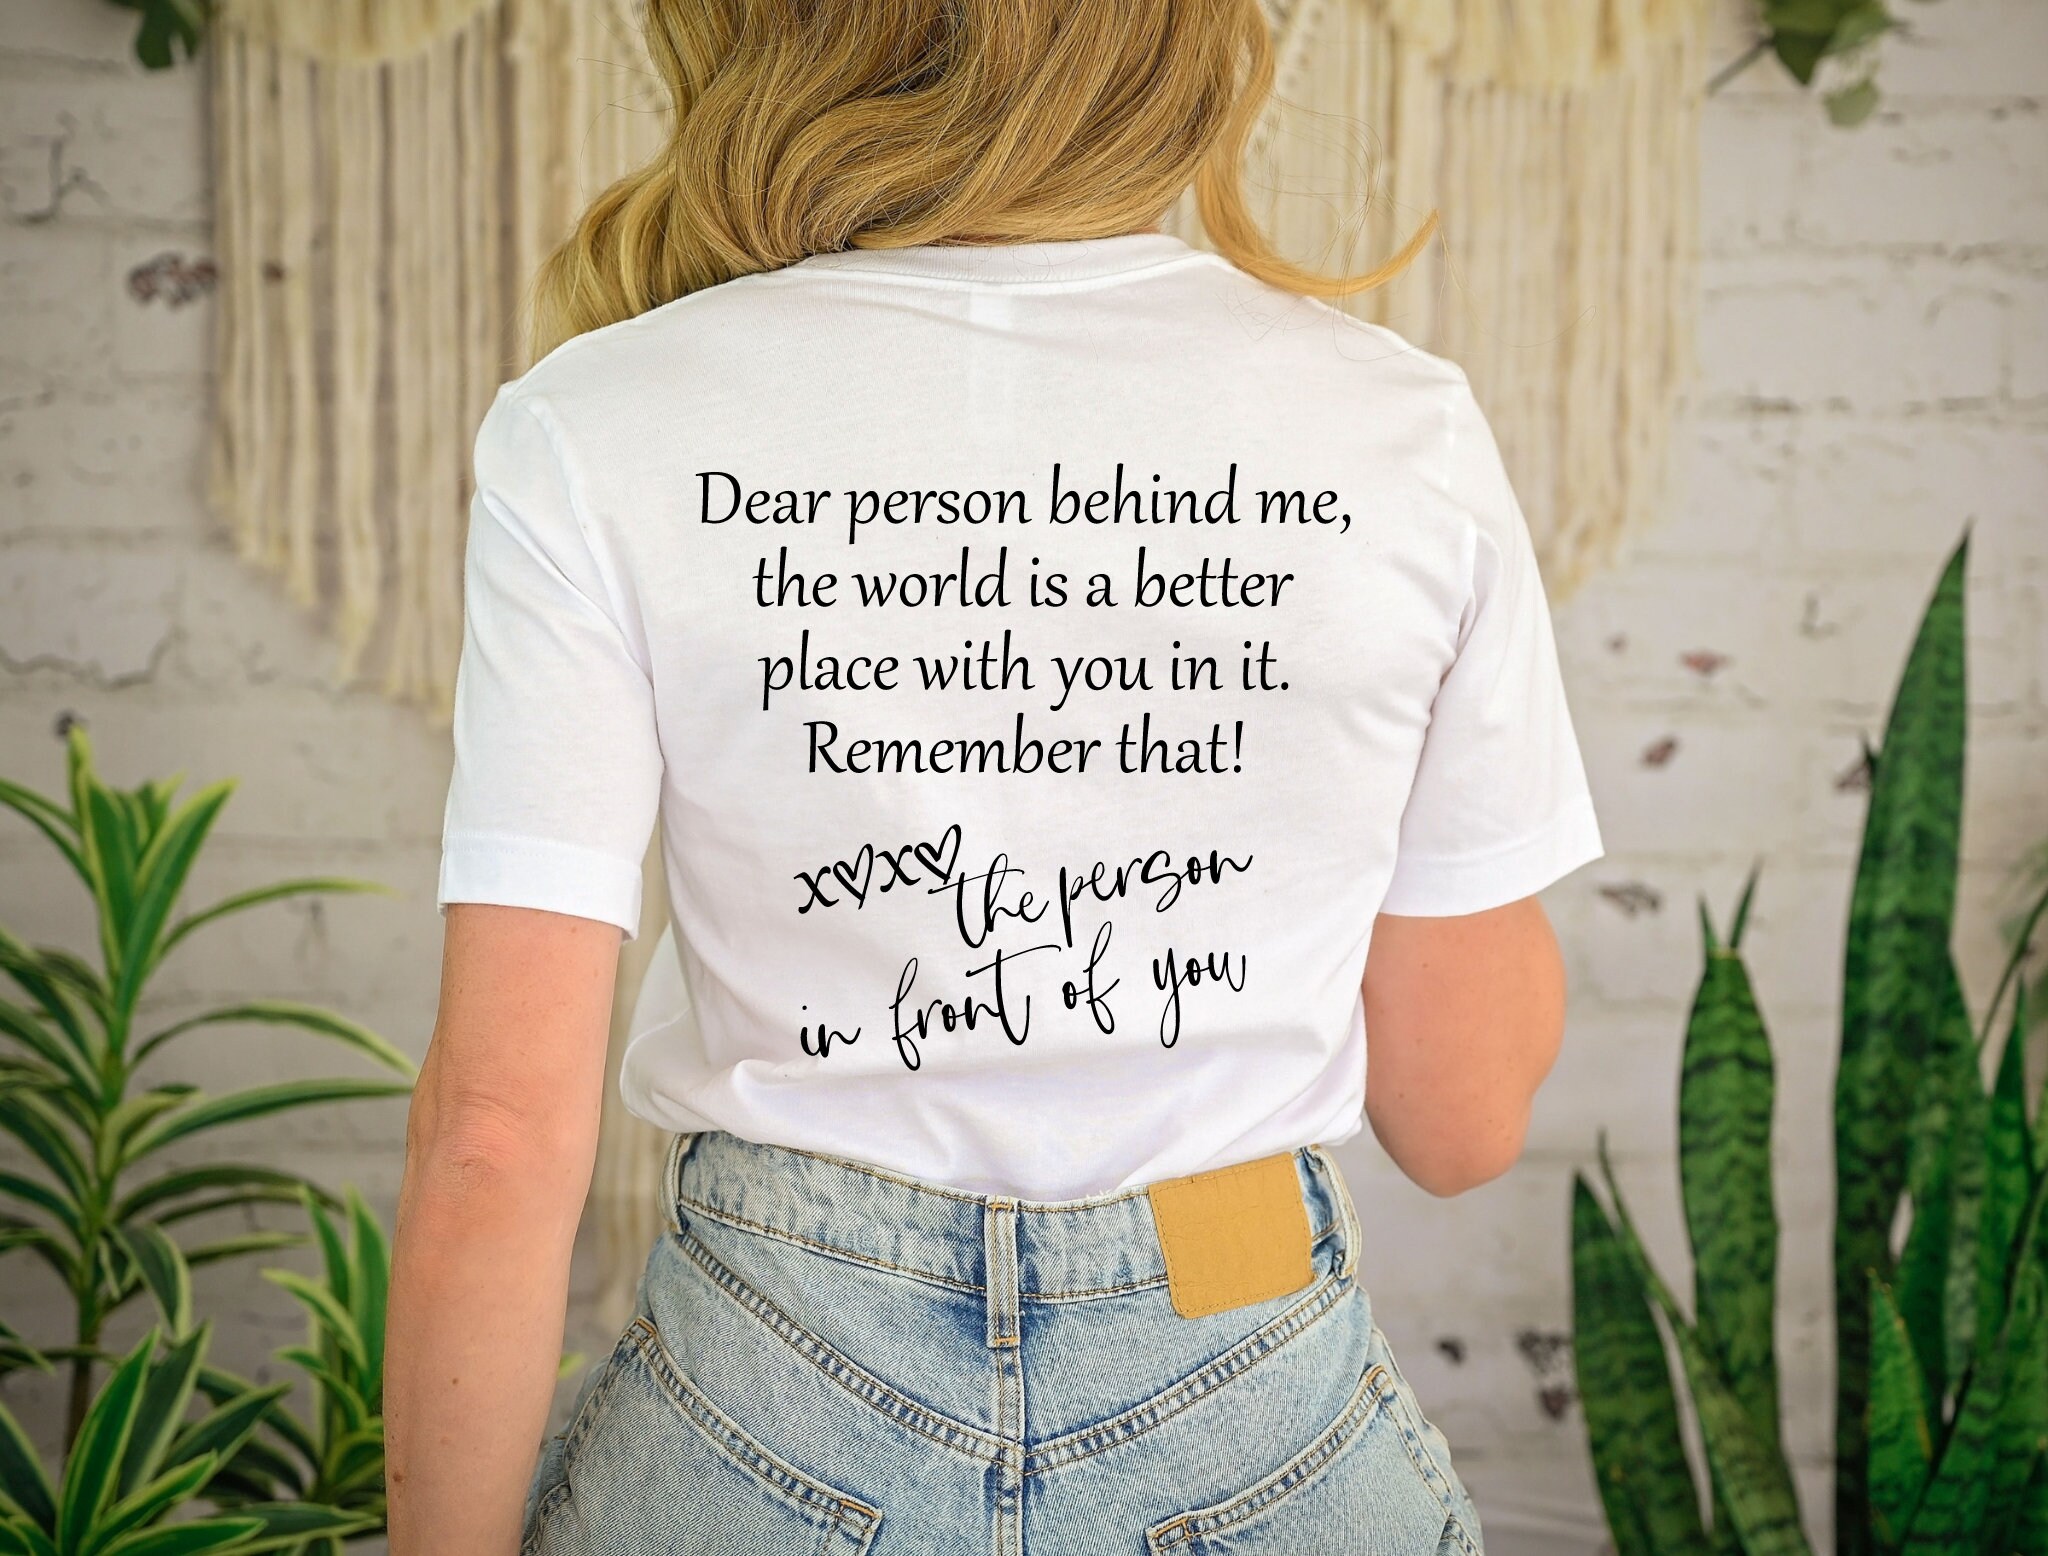 Discover Dear Person Behind Me Shirt, You Matter Tee, Motivational tee, You Are Enough Shirt, Mental Health Matters Shirt, Kindness Shirt,Be kind tee